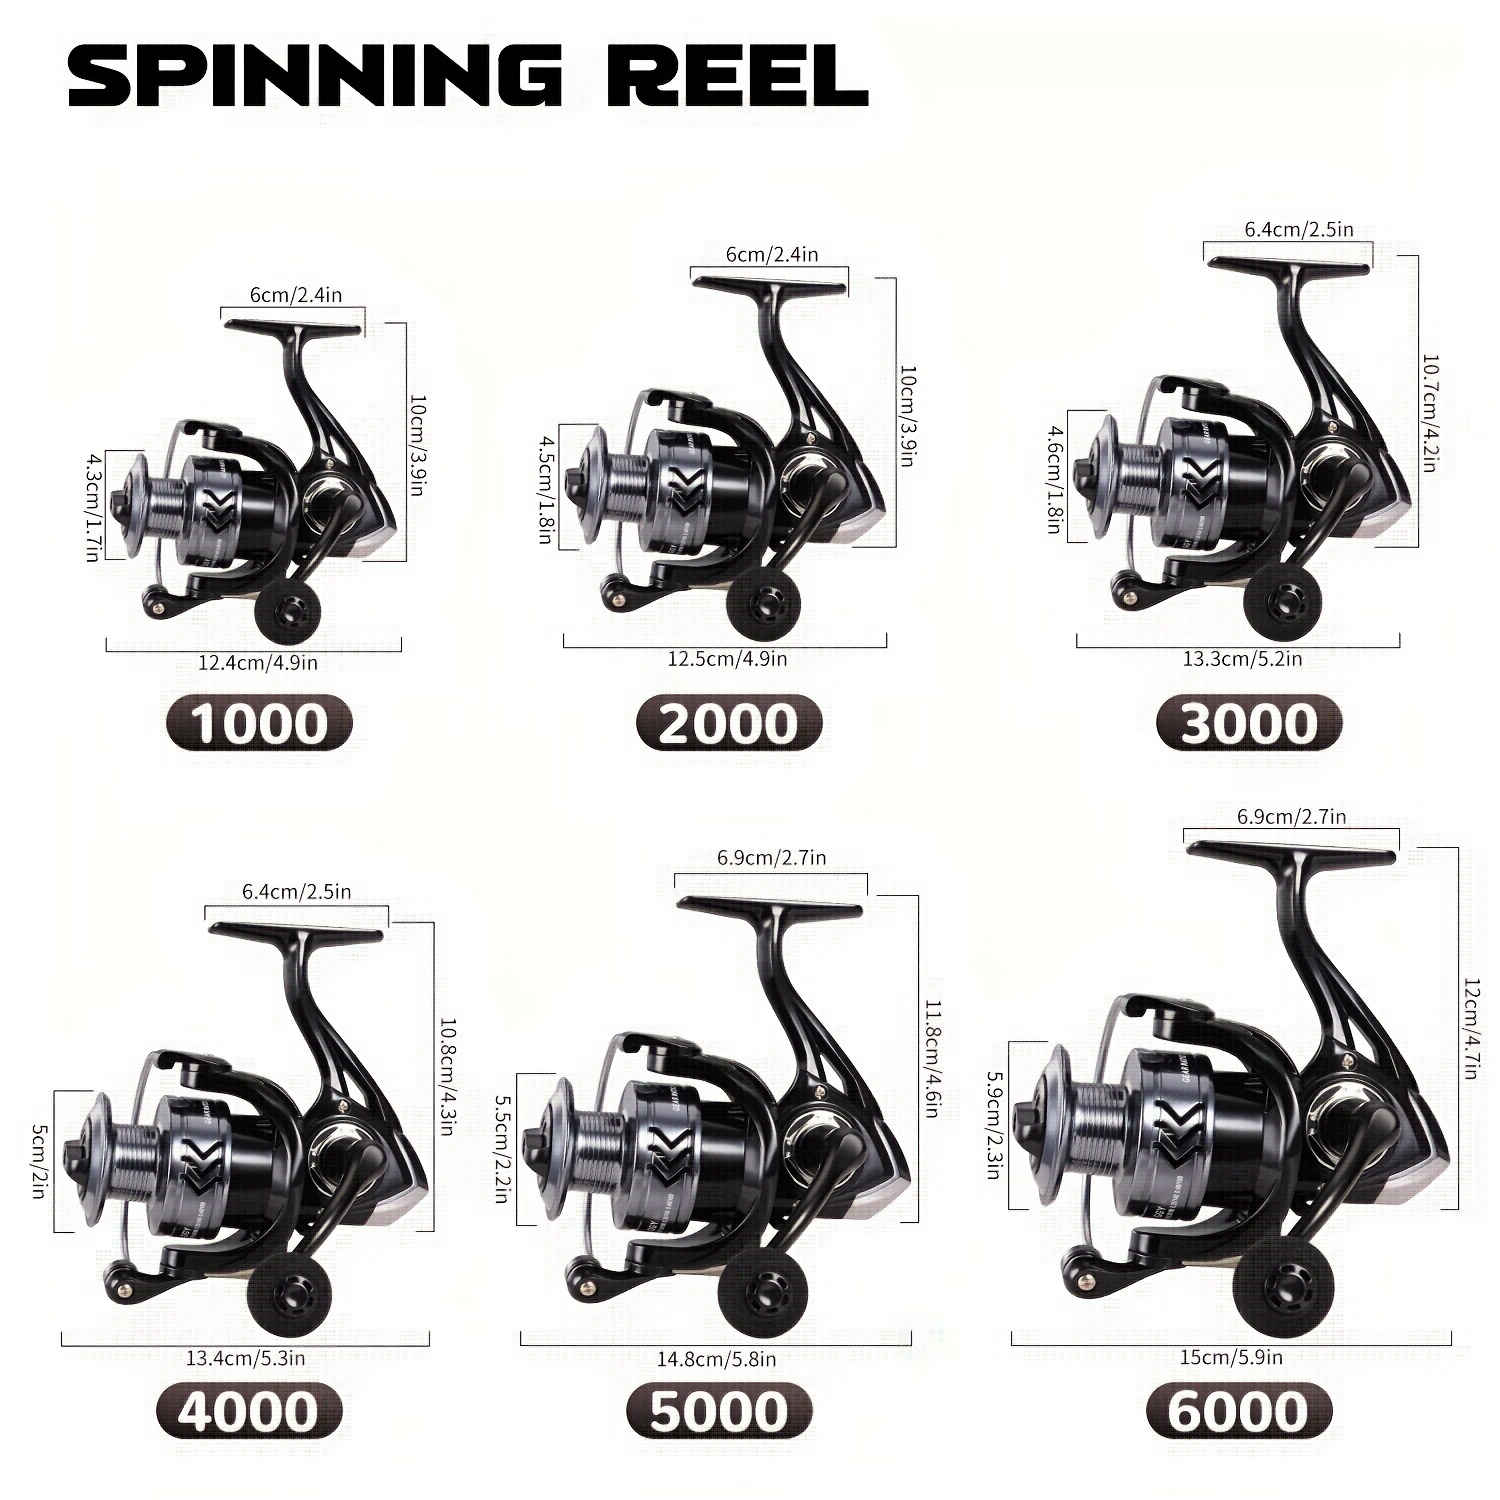 Sougayilang 2000 3000 Series White 11+1BB Spinning Reel, 5.2:1 Gear Ratio  Fishing Reel With Aluminum Spool For Freshwater Saltwater